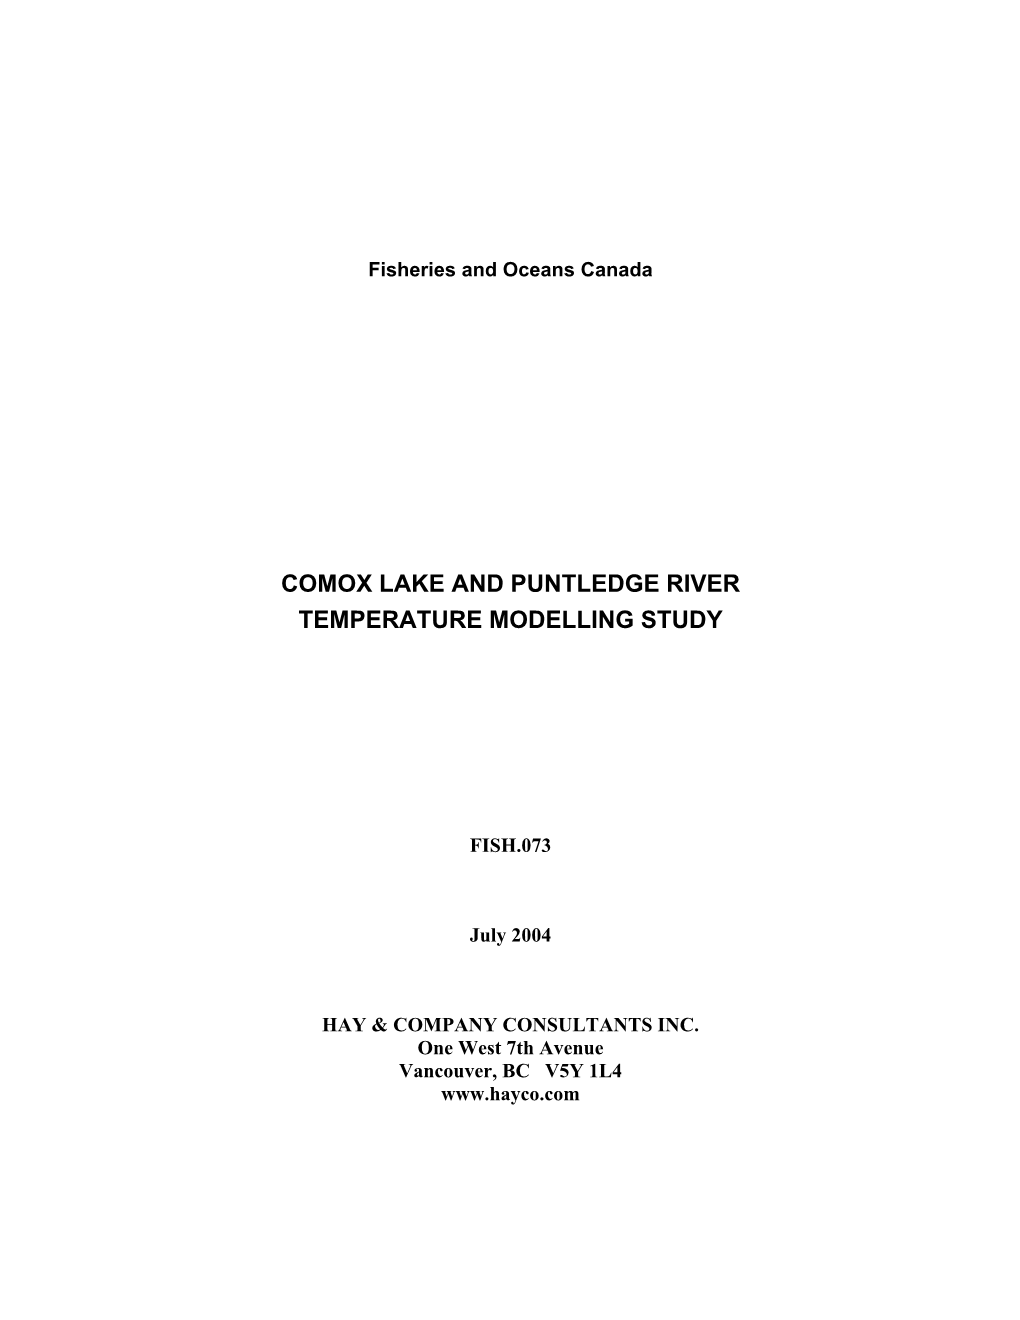 Comox Lake and Puntledge River Temperature Modelling Study